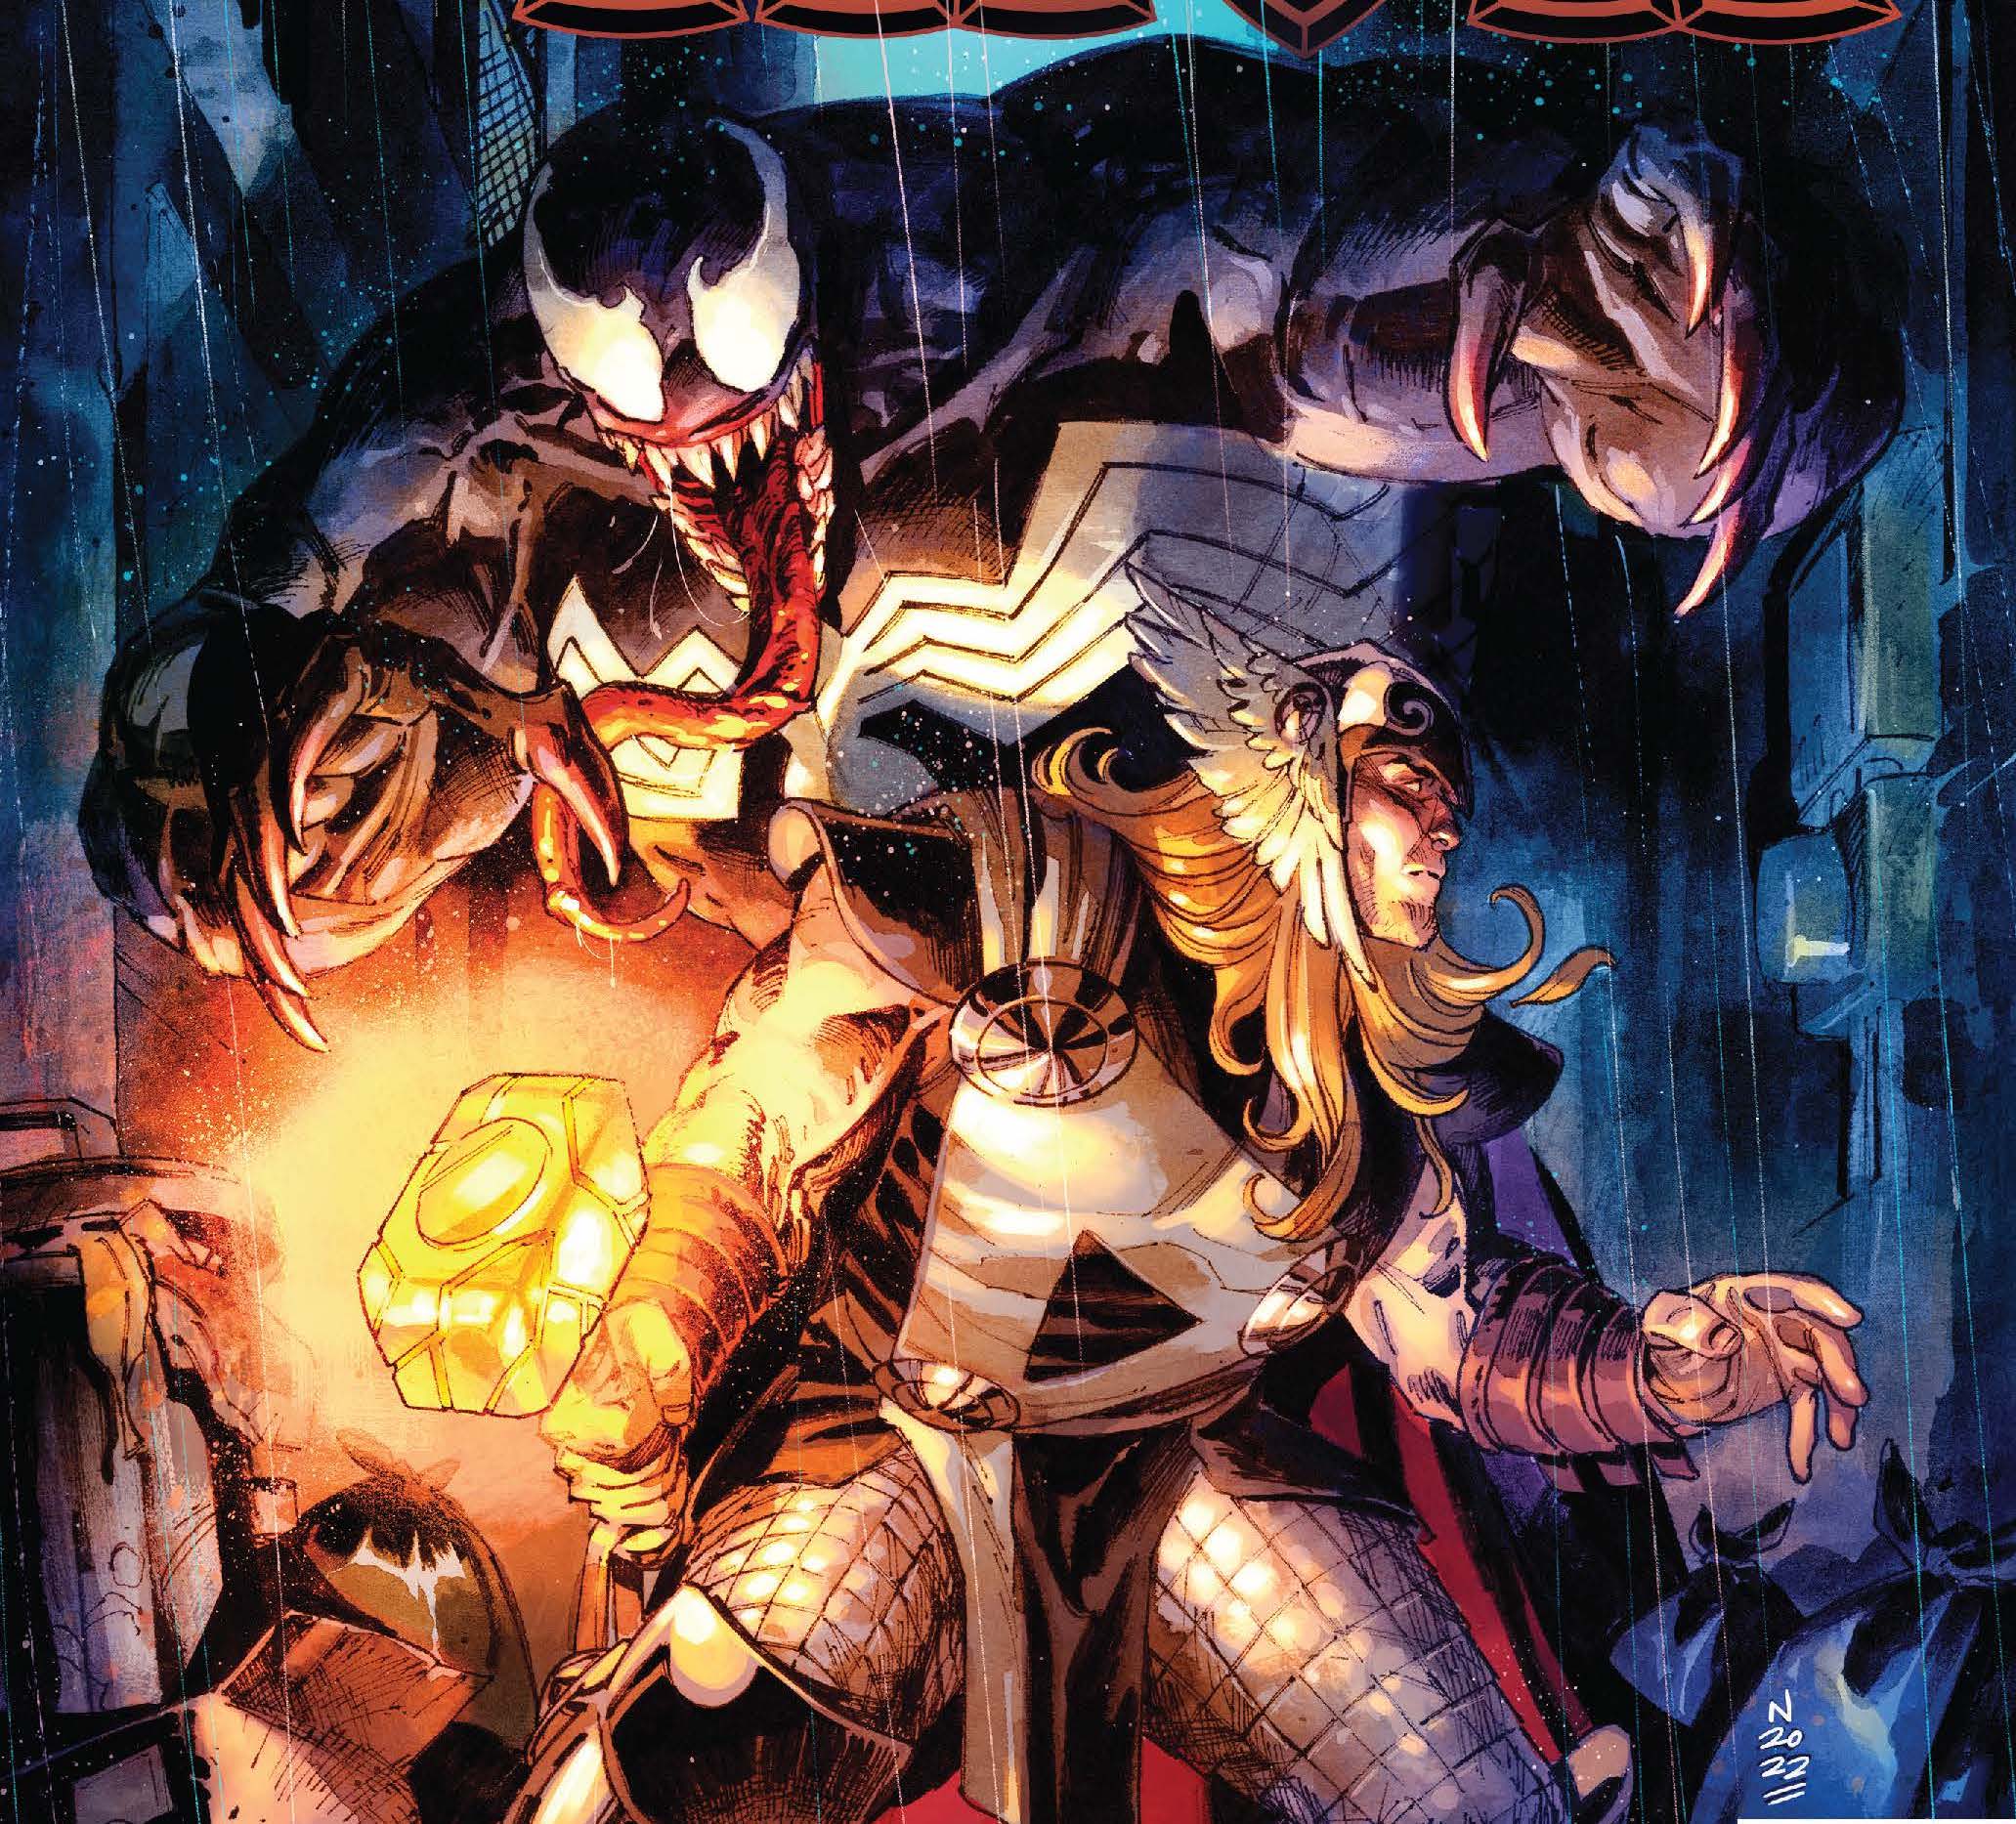 EXCLUSIVE Marvel Preview: Thor #27 featuring Venom!